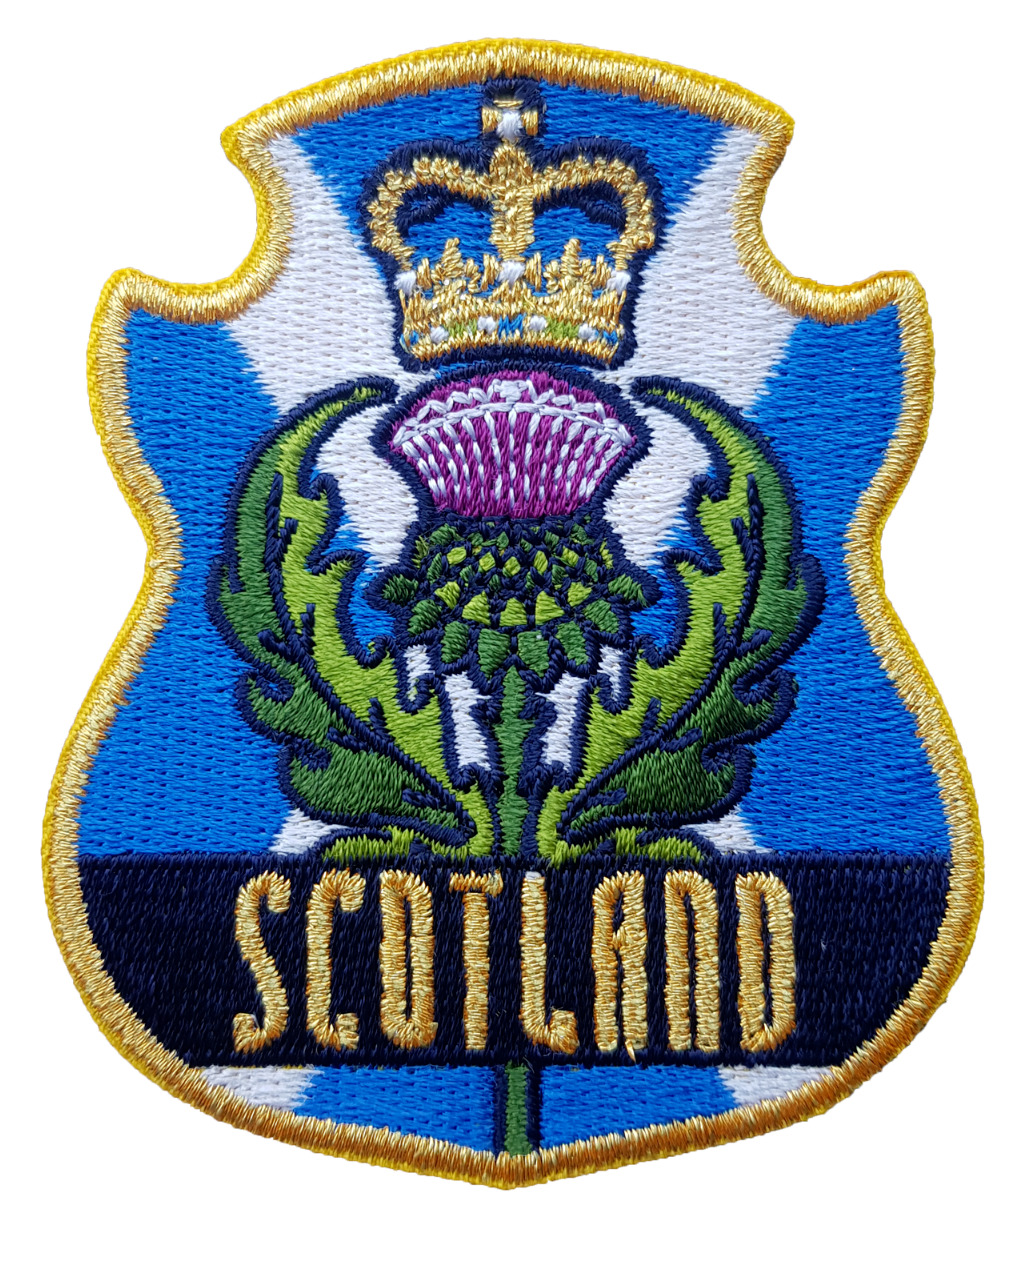 Scotland Travel Patch Embroidered Iron on Sew on Souvenir Applique